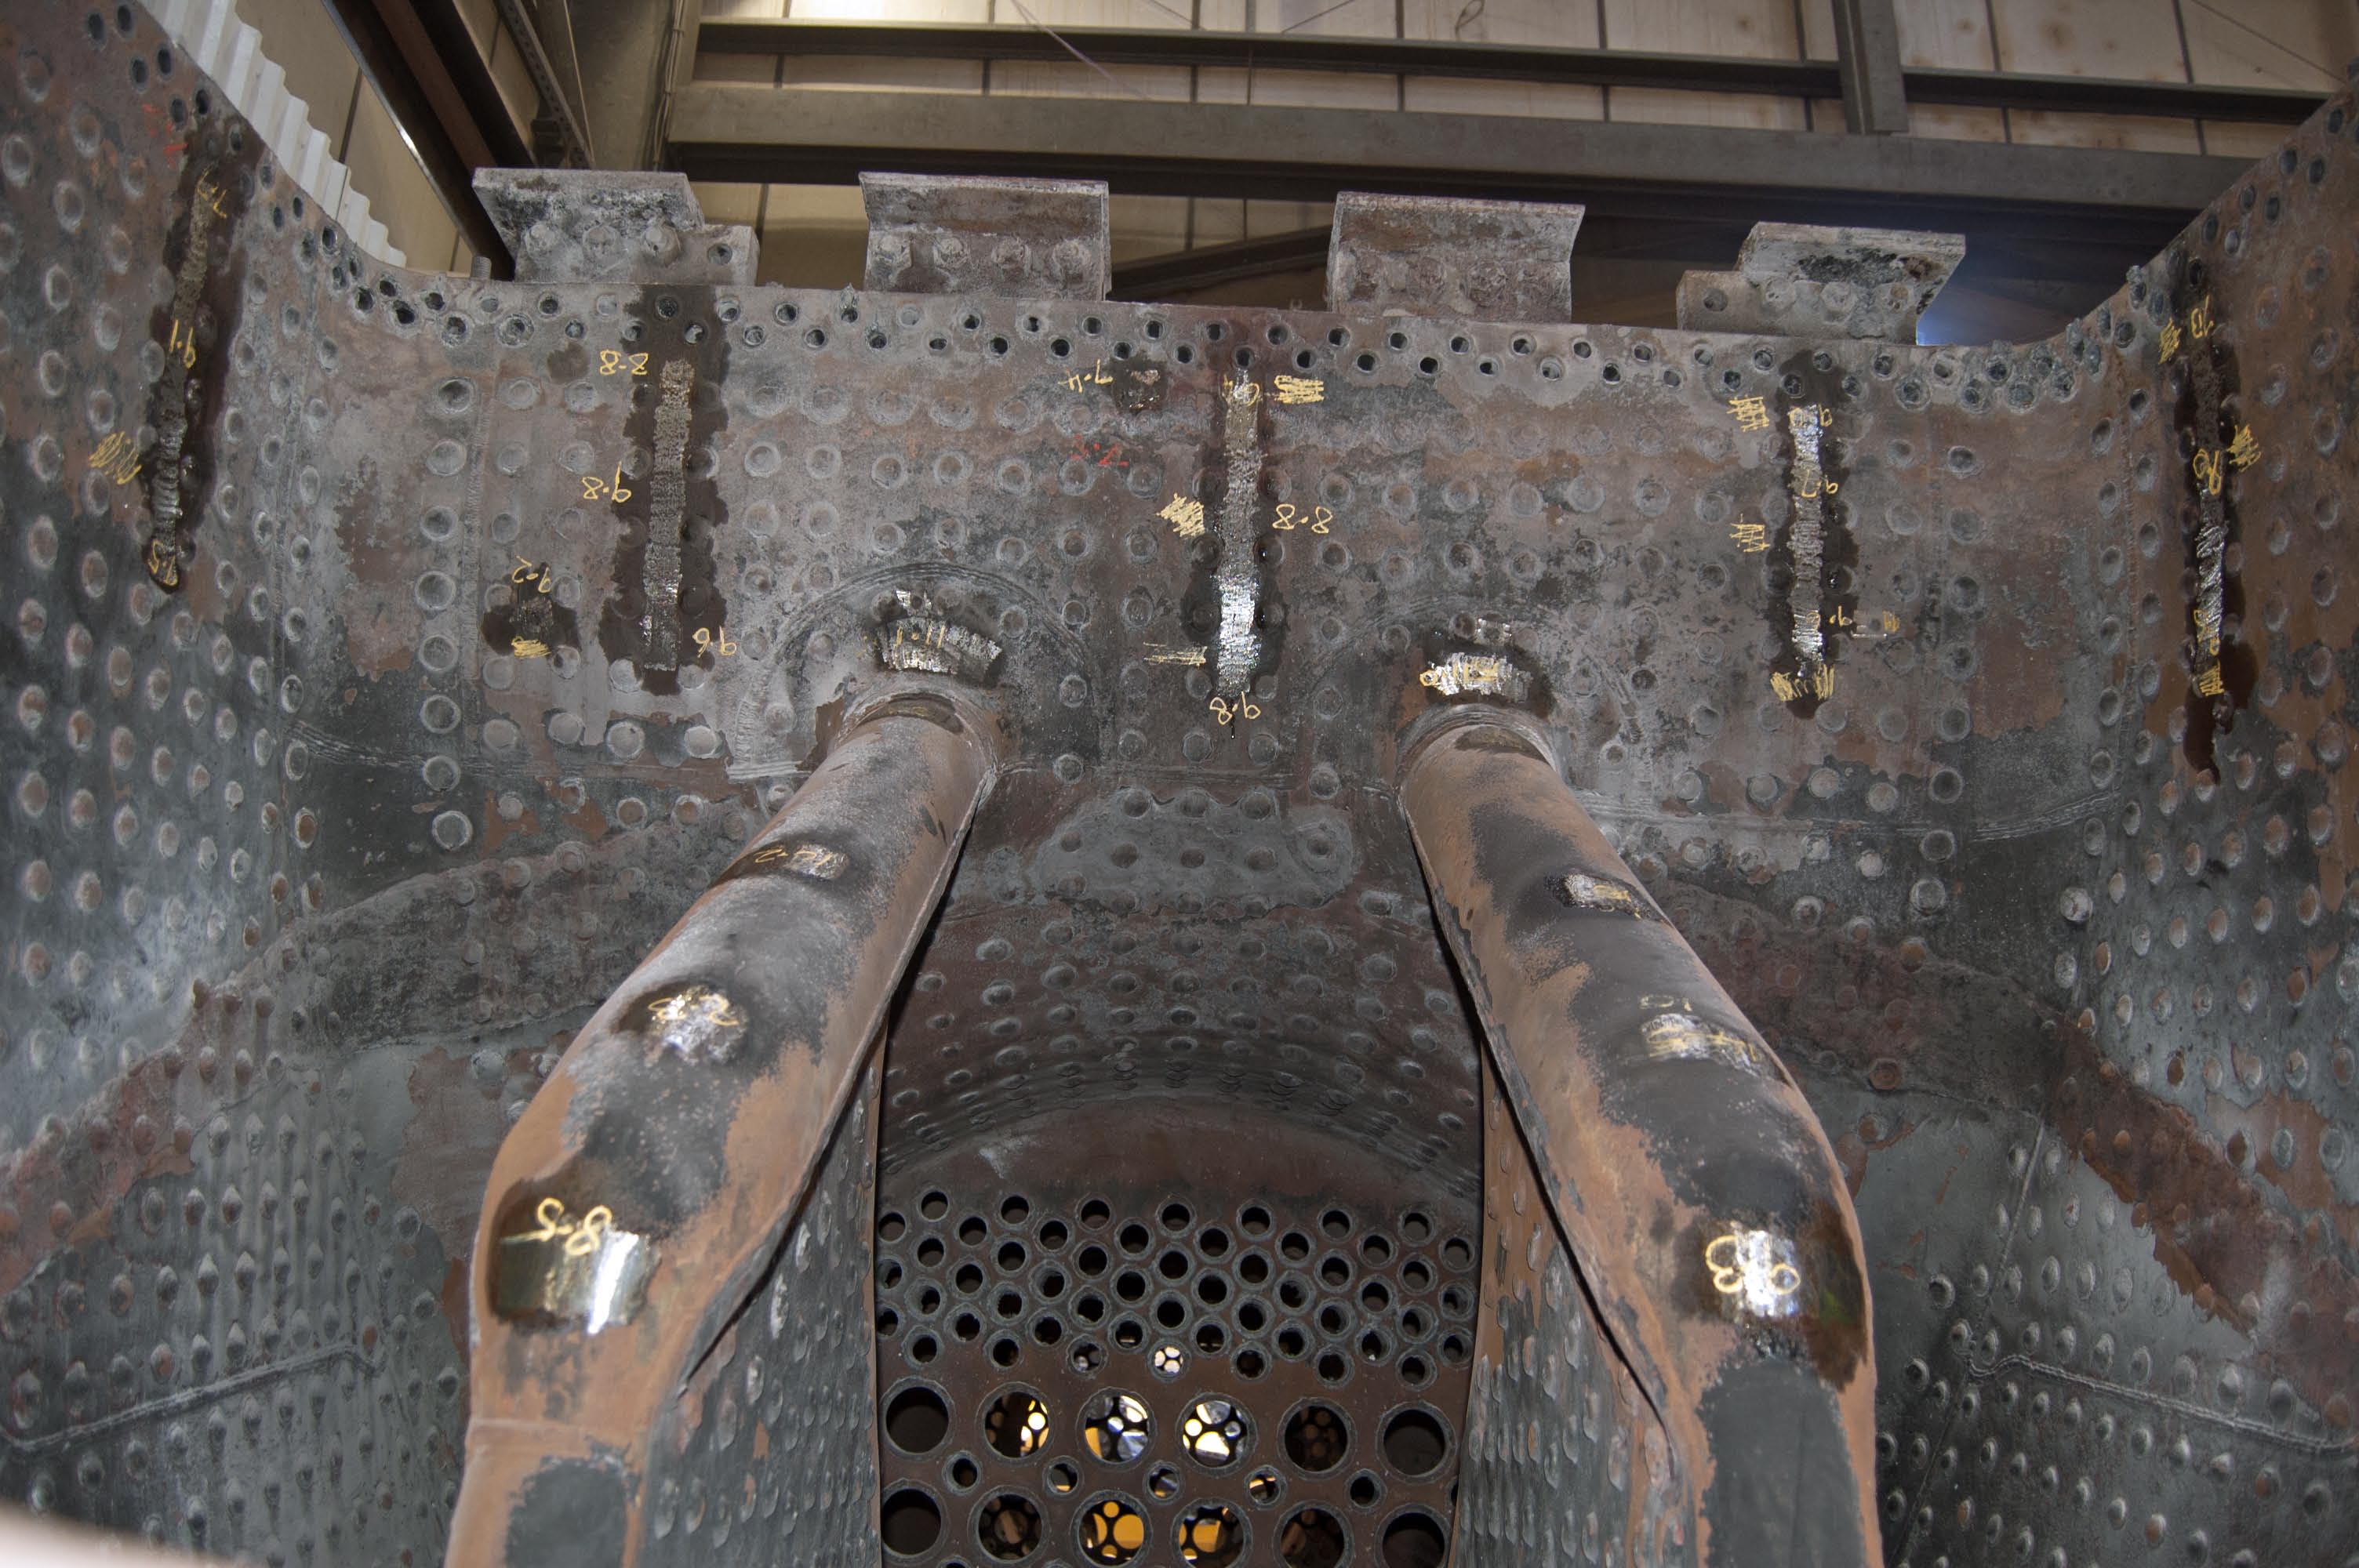 Some of the boiler plate has already been tested for thickness